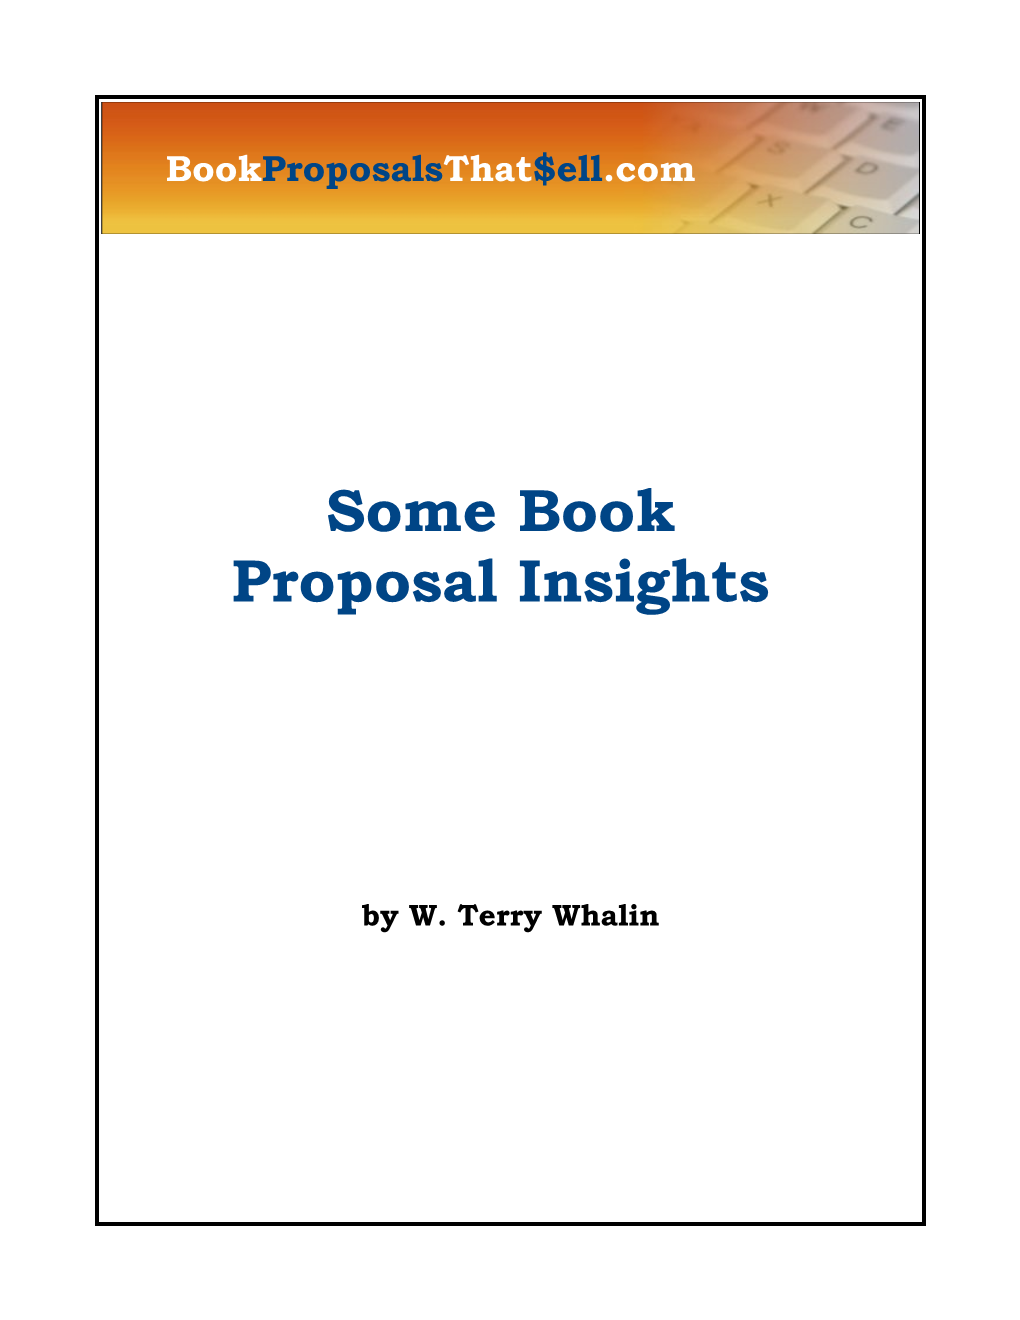 Some Book Proposal Insights by W. Terry Whalin